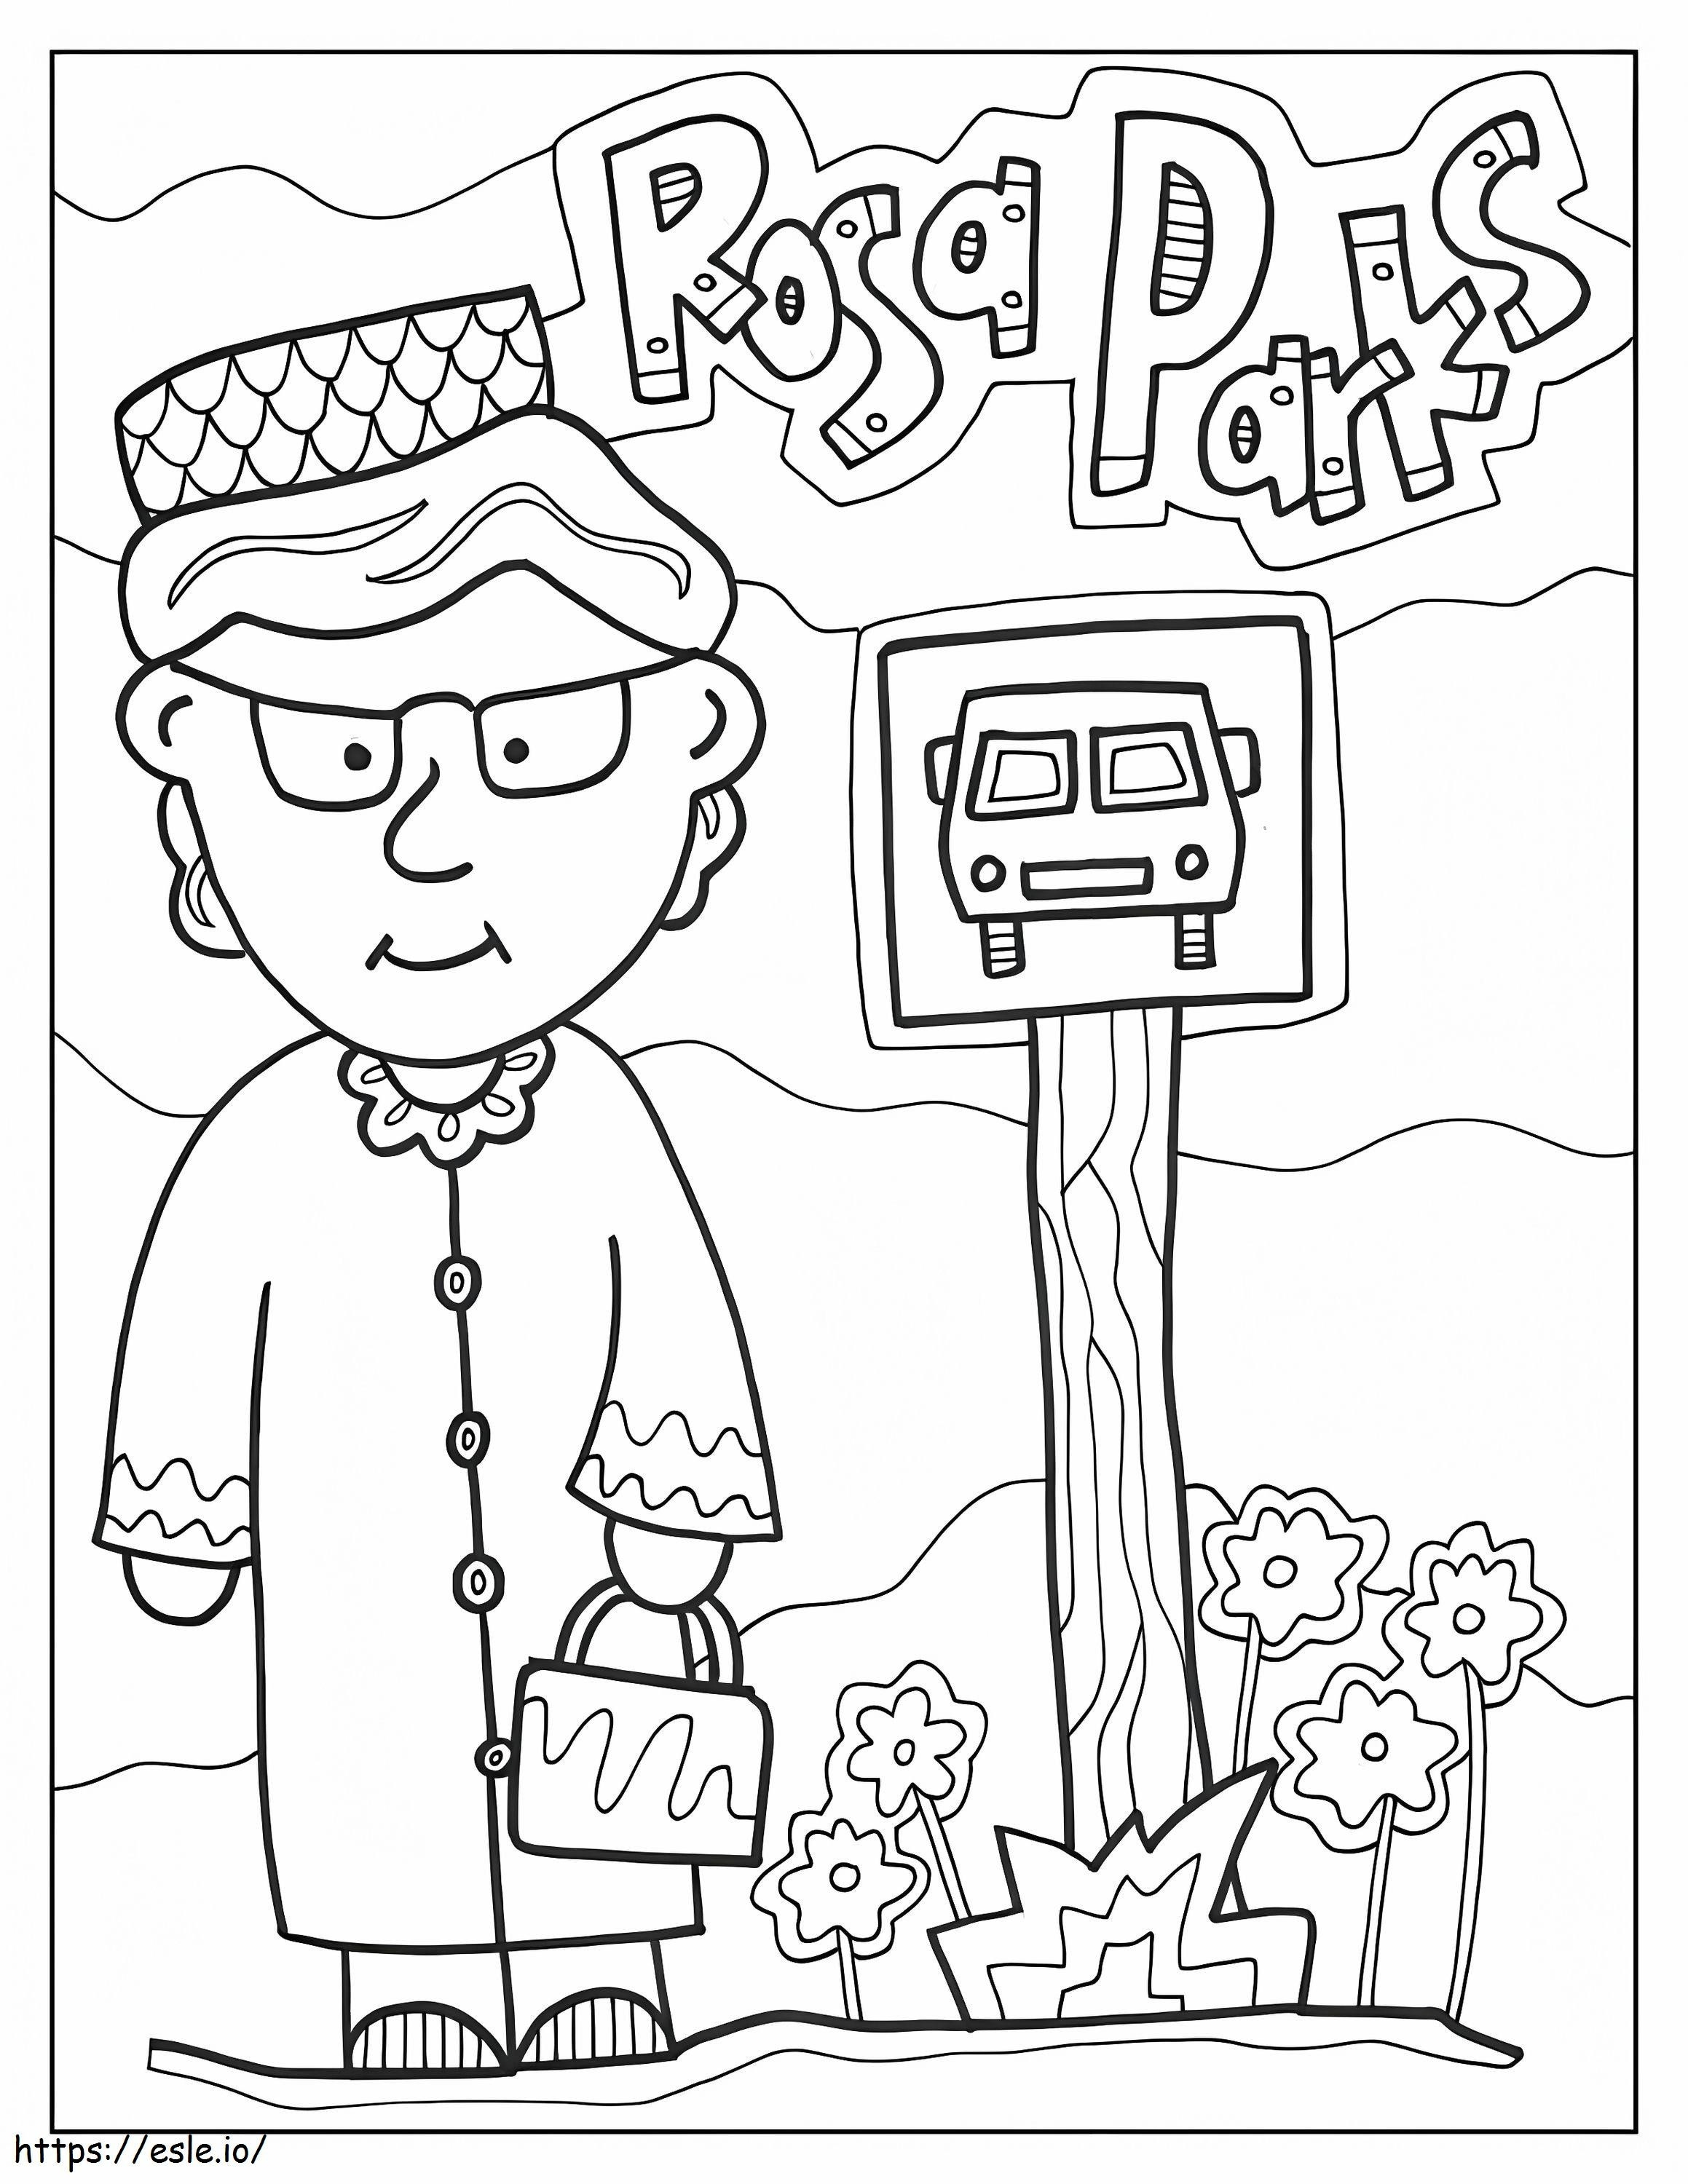 Rosa Parks 1 coloring page